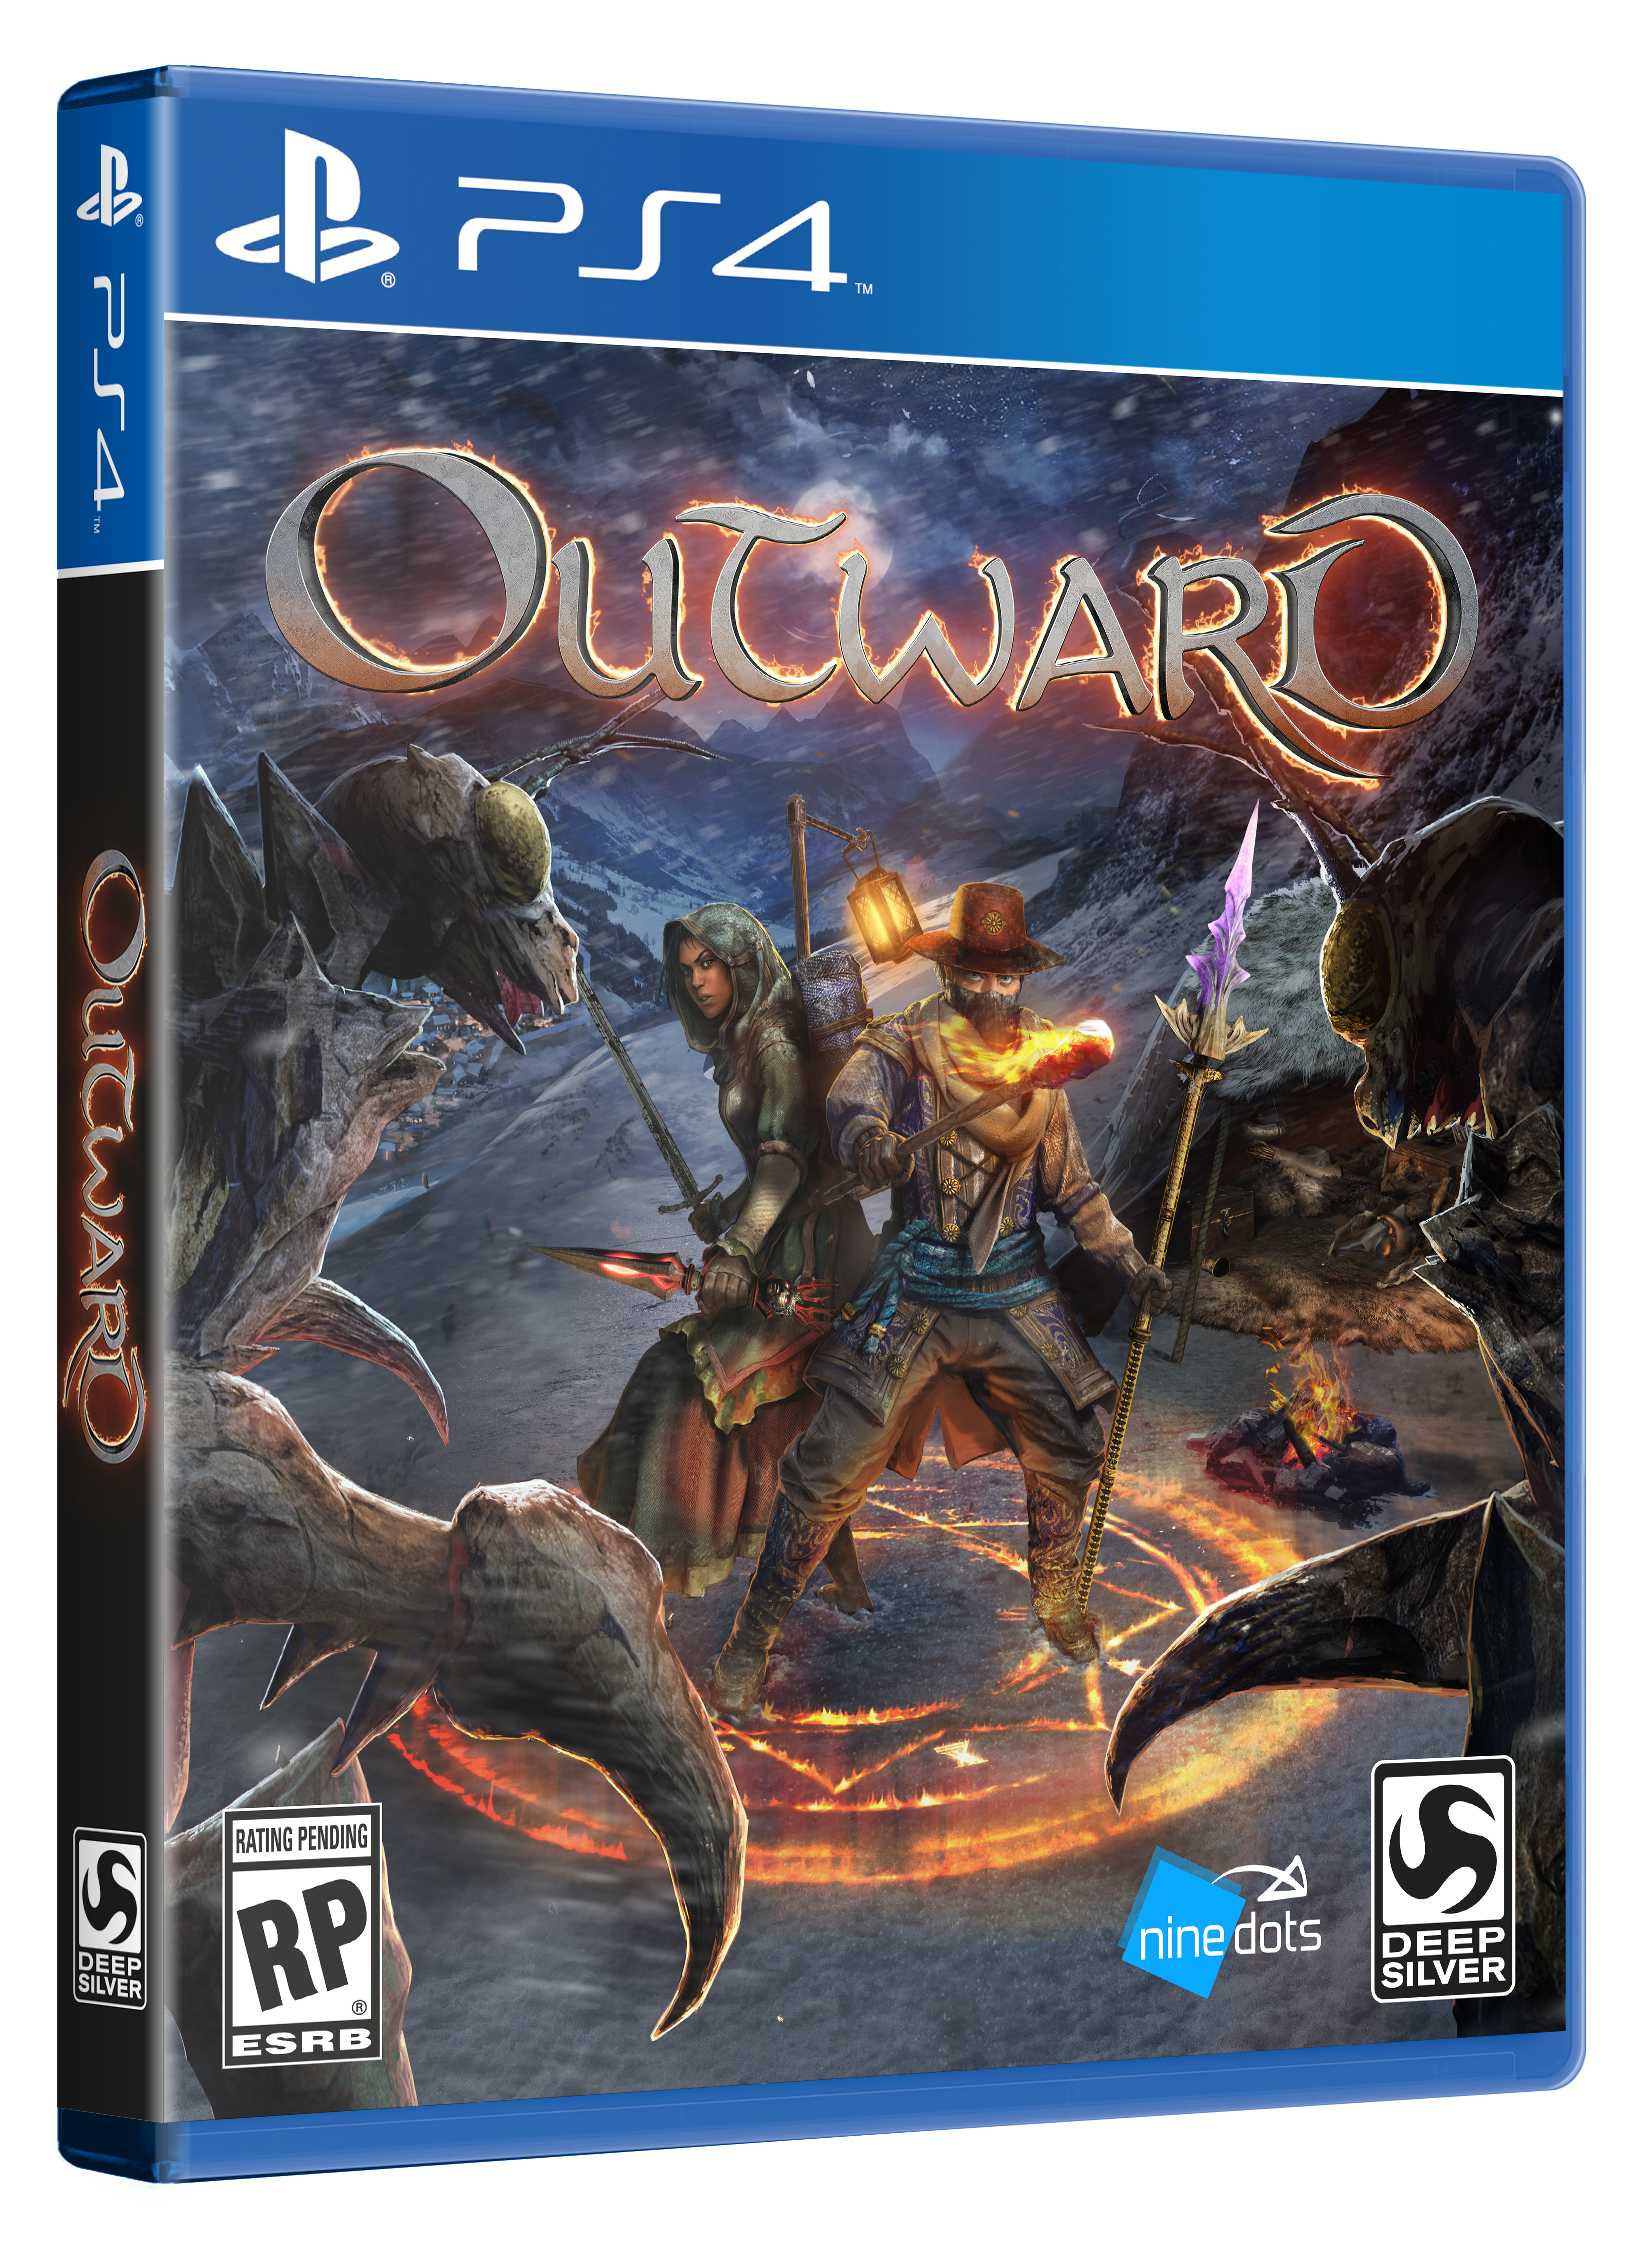 Outward brings unique open-world RPG adventuring to Xbox One, PS4